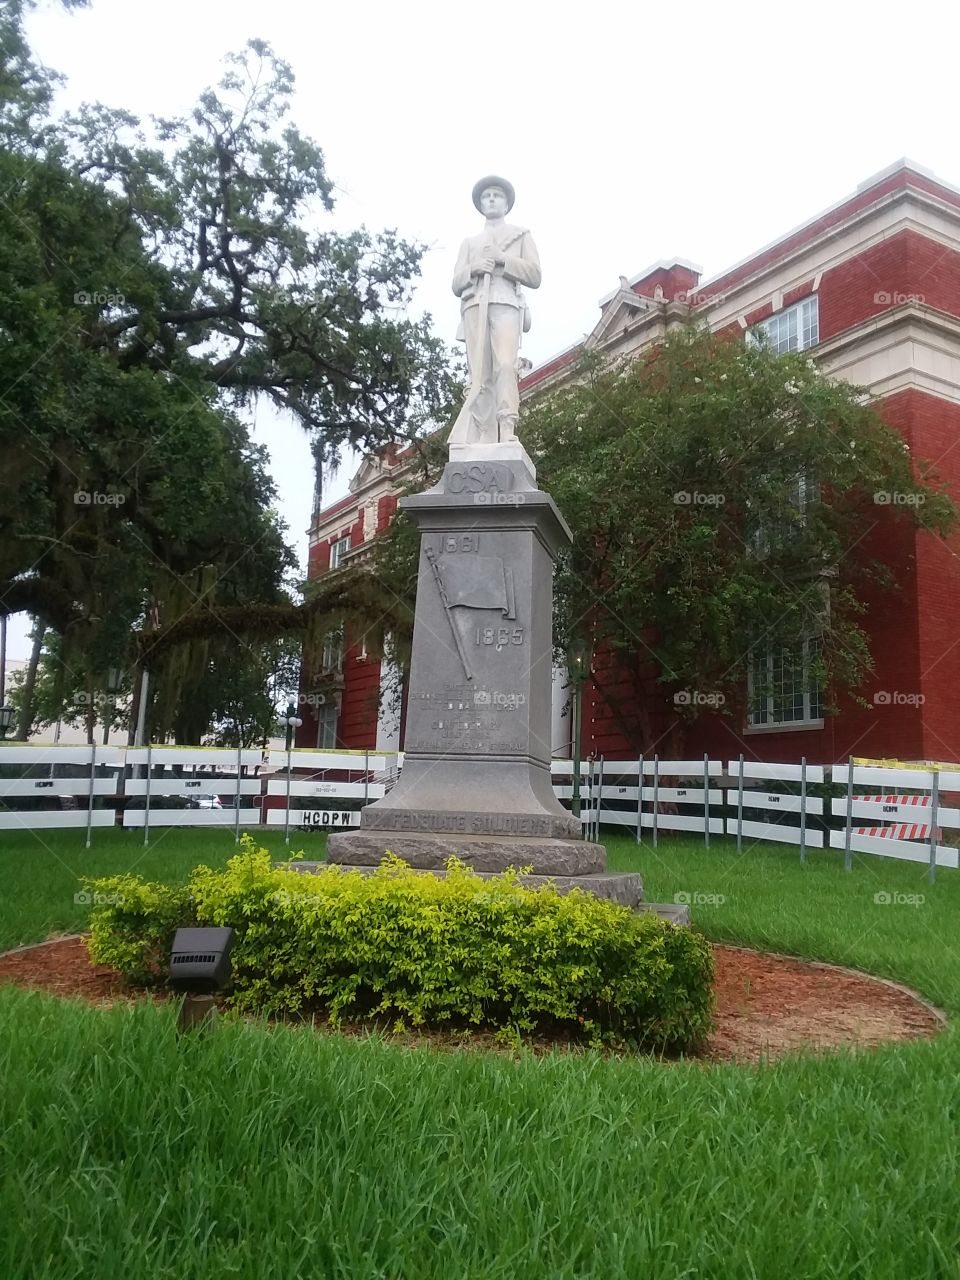 Confederate Soldier Statue of Downtown Brooksville, Florida